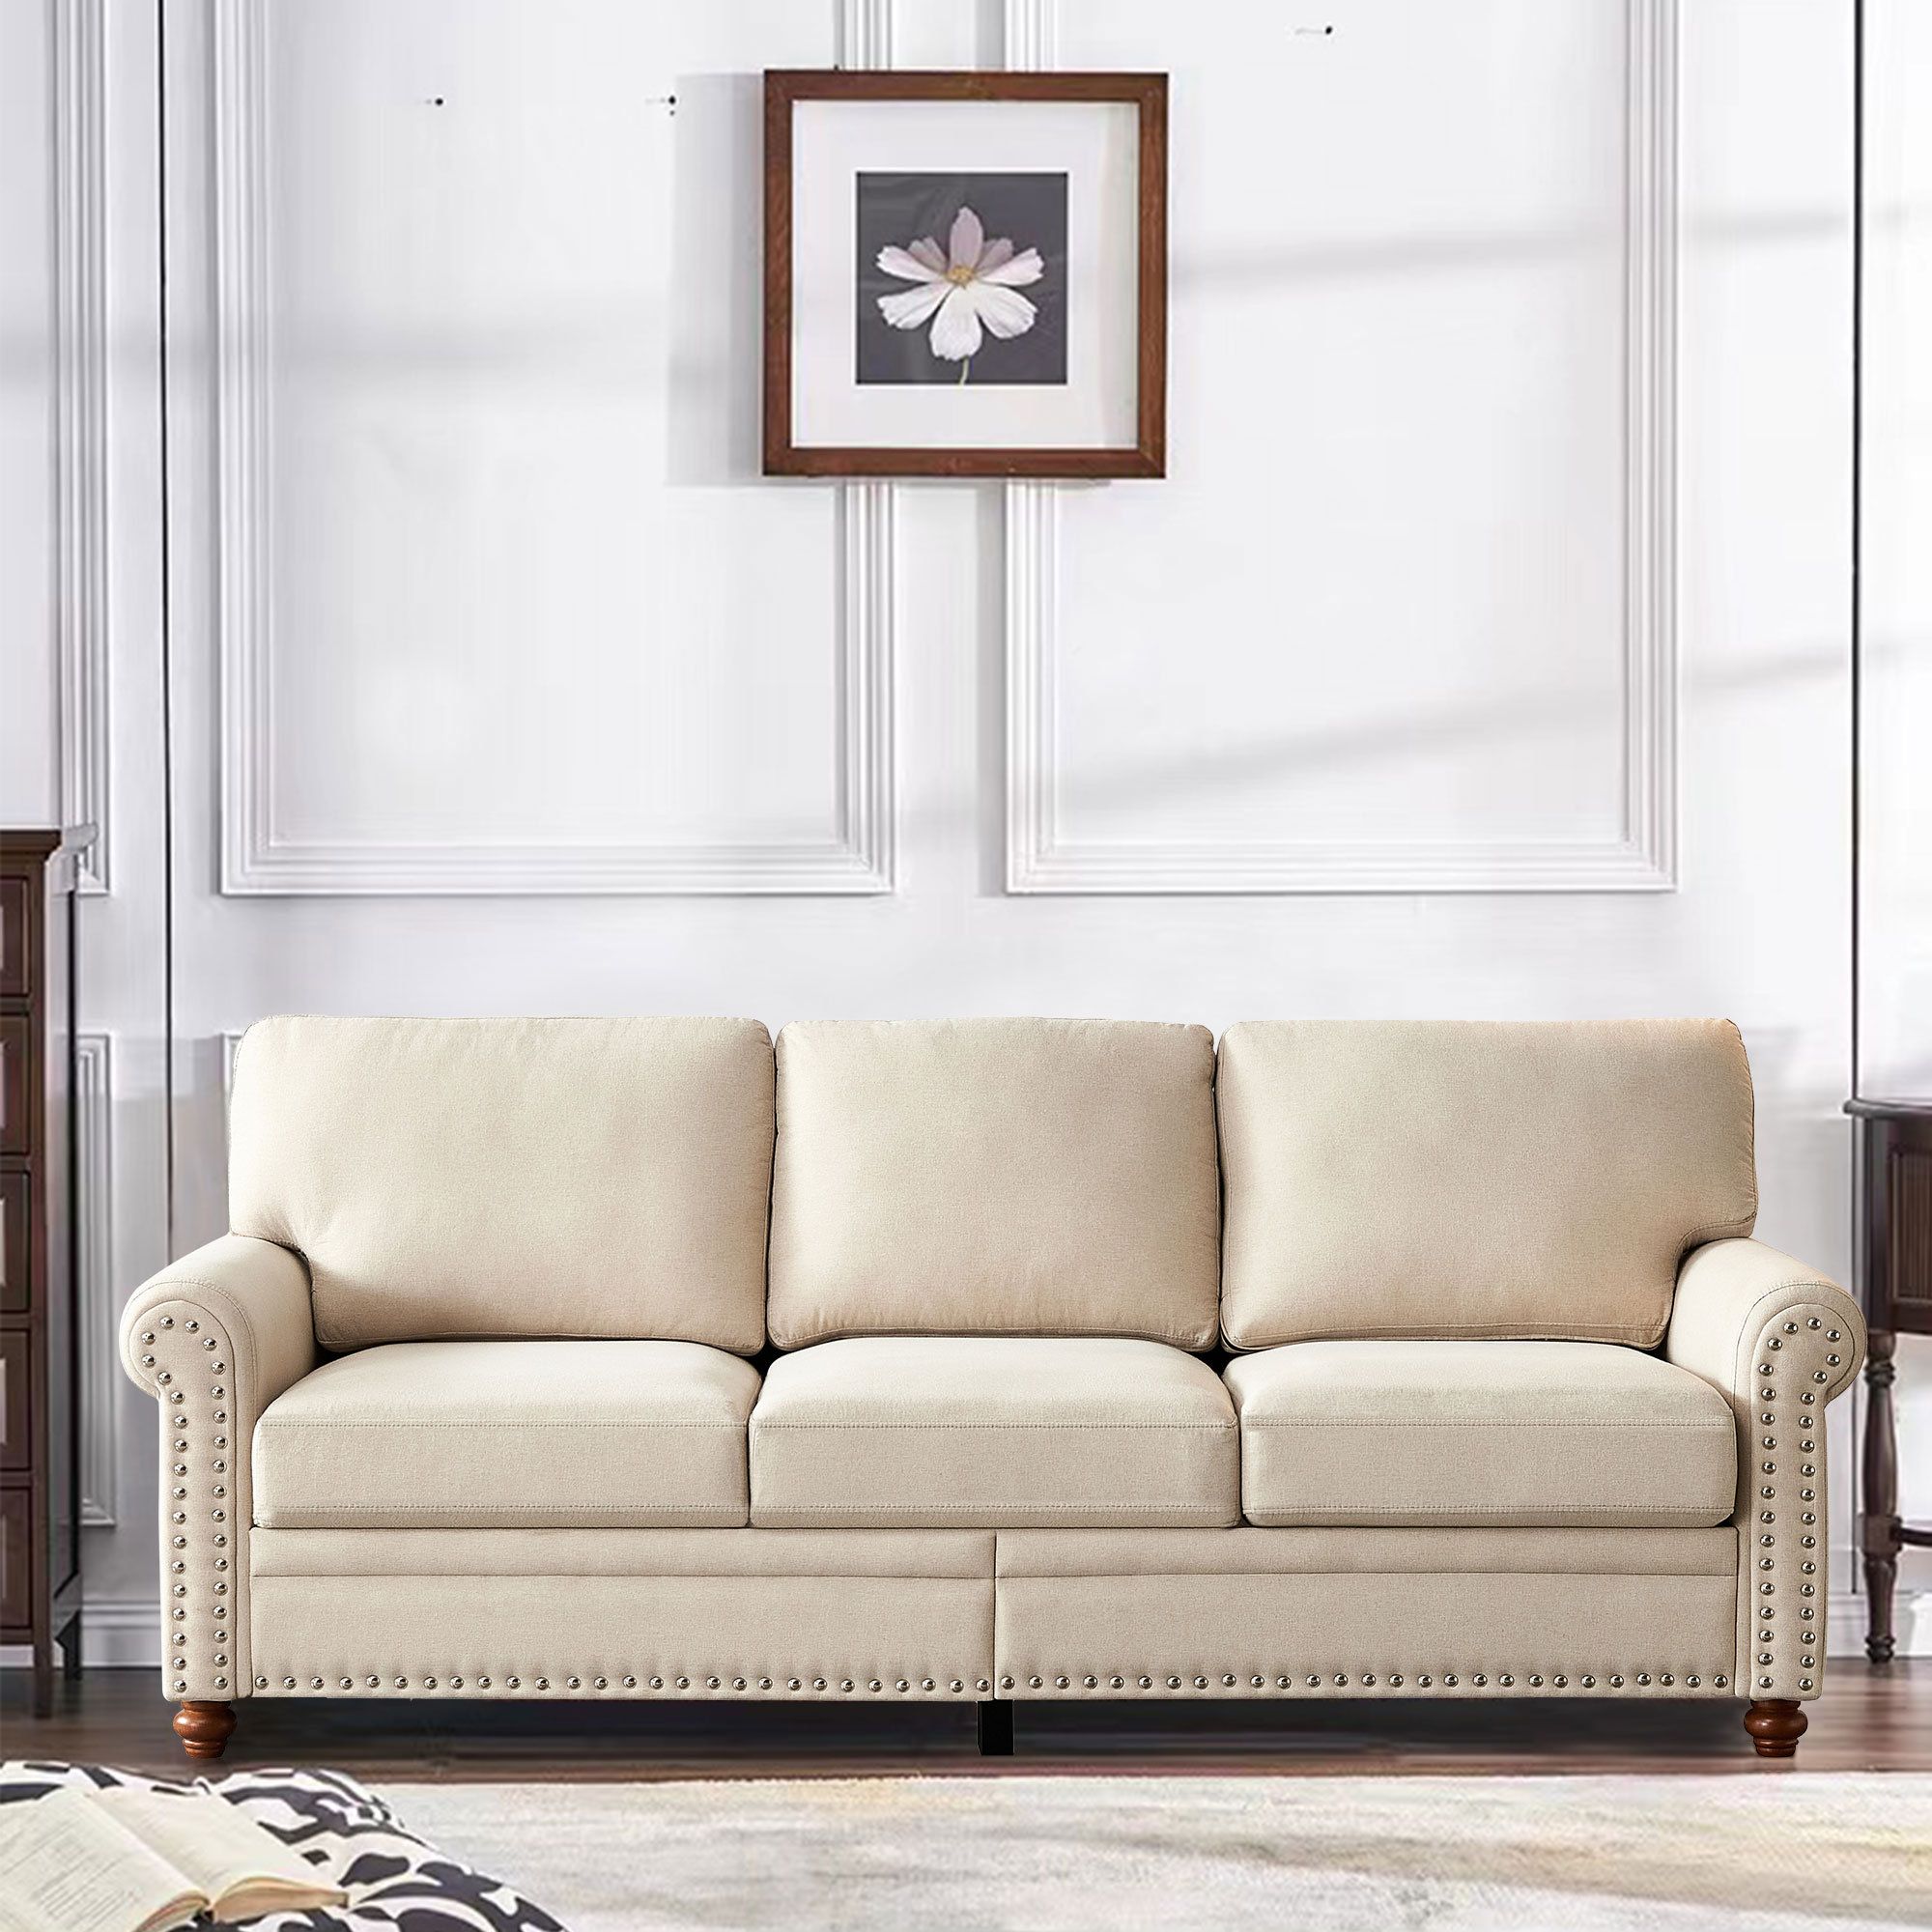 Charlton Home® Aldwon 82'' Wide Rolled Arm Sofa With Nailhead Trim | Wayfair Intended For Sofas With Nailhead Trim (View 4 of 15)